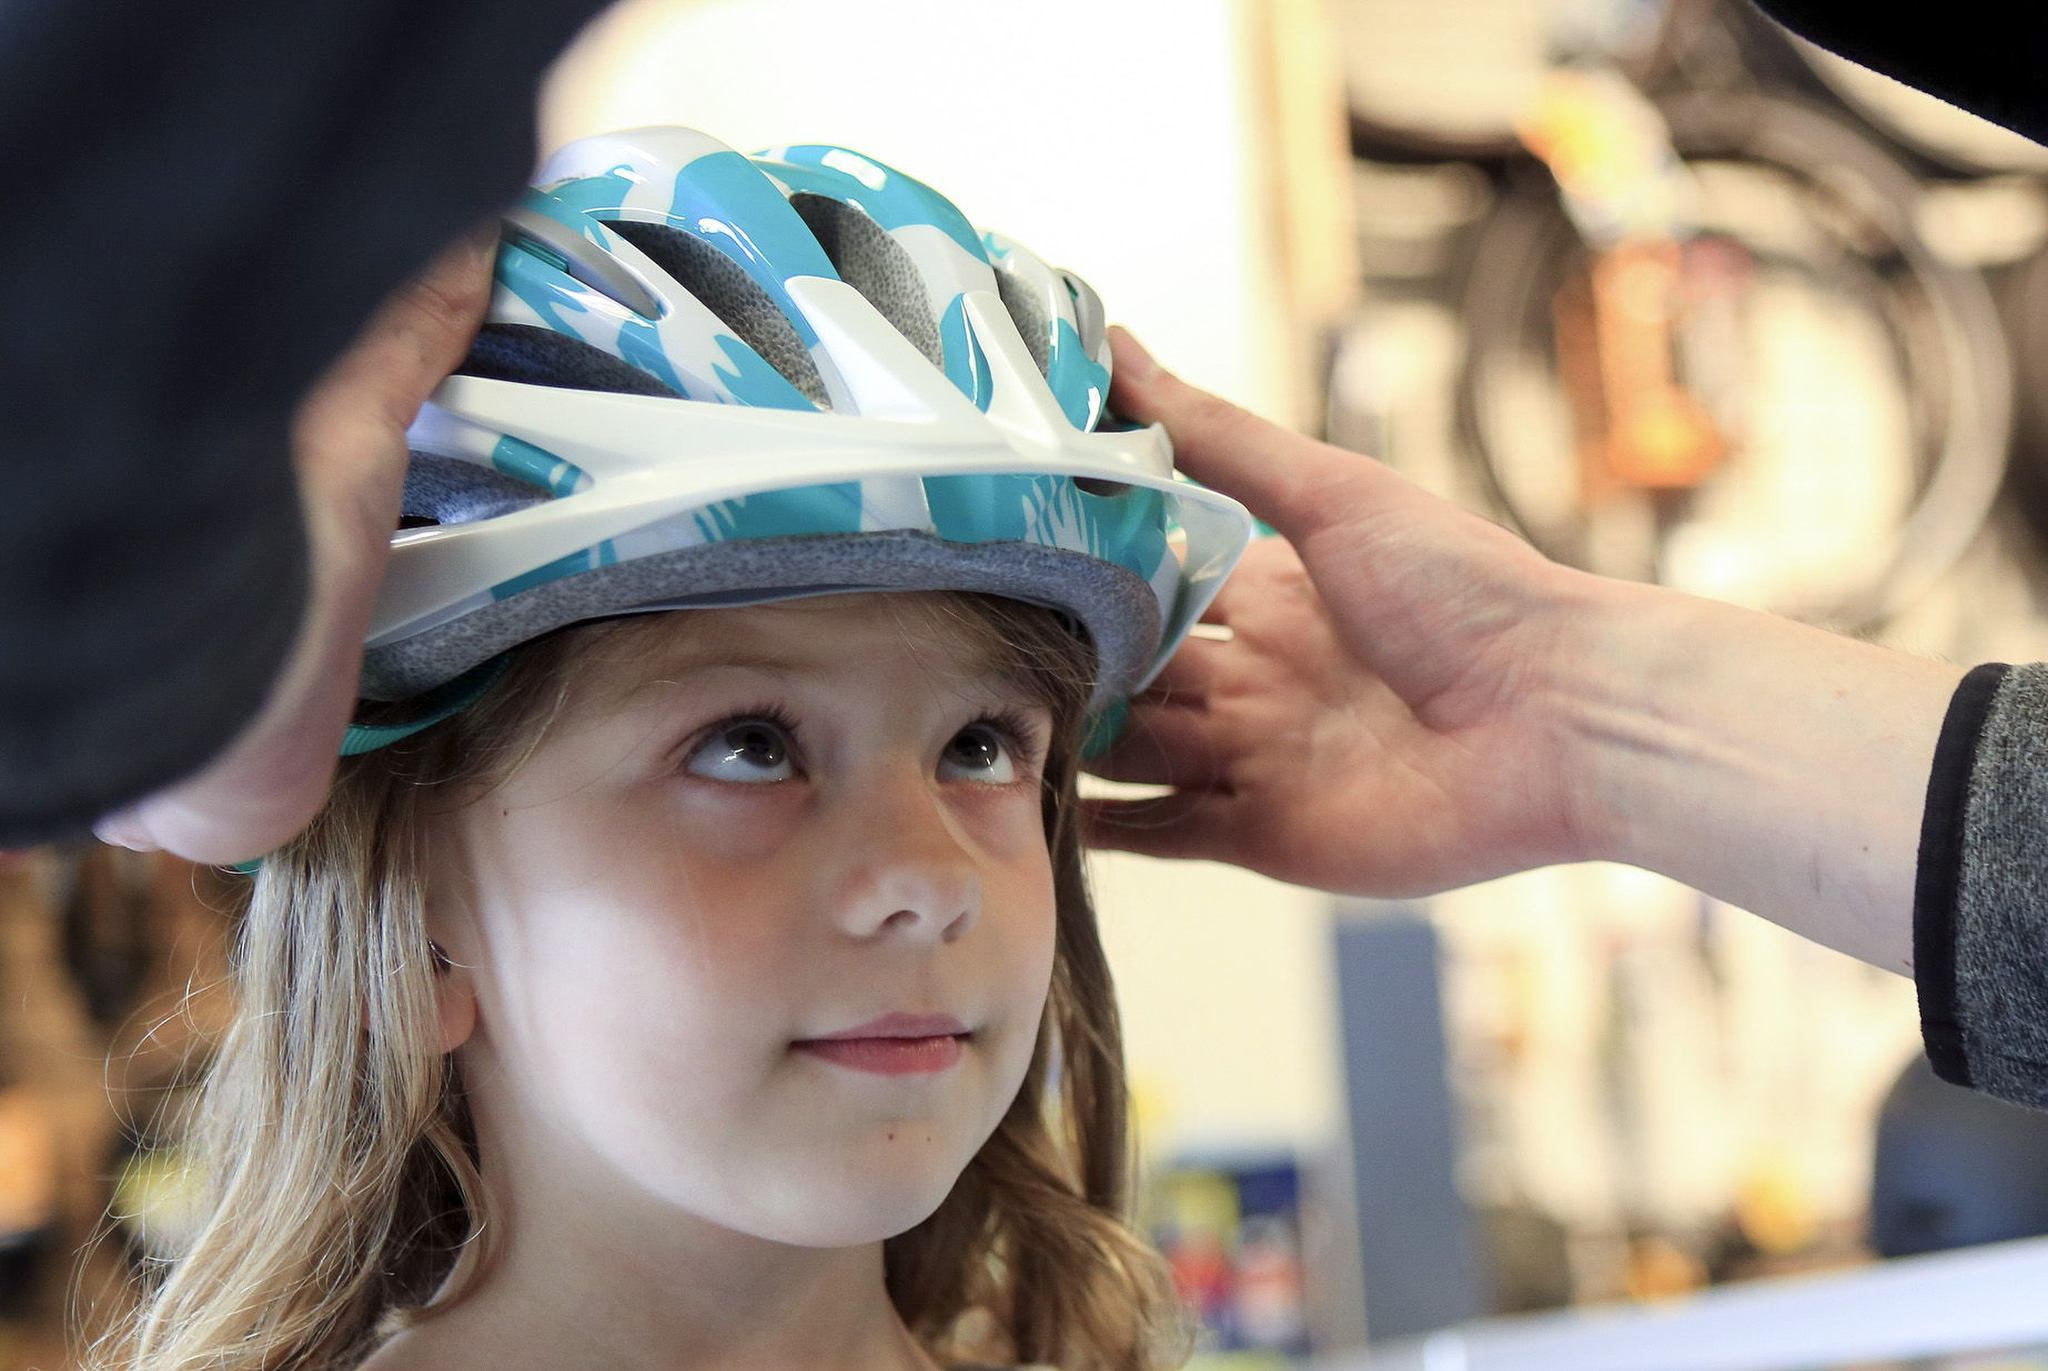 Bayside Bikes owner Eric Smith does a “shake test” to see if a helmet is properly sized for the reporter’s daughter, Geneva, 5. (Kevin Clark / The Herald)